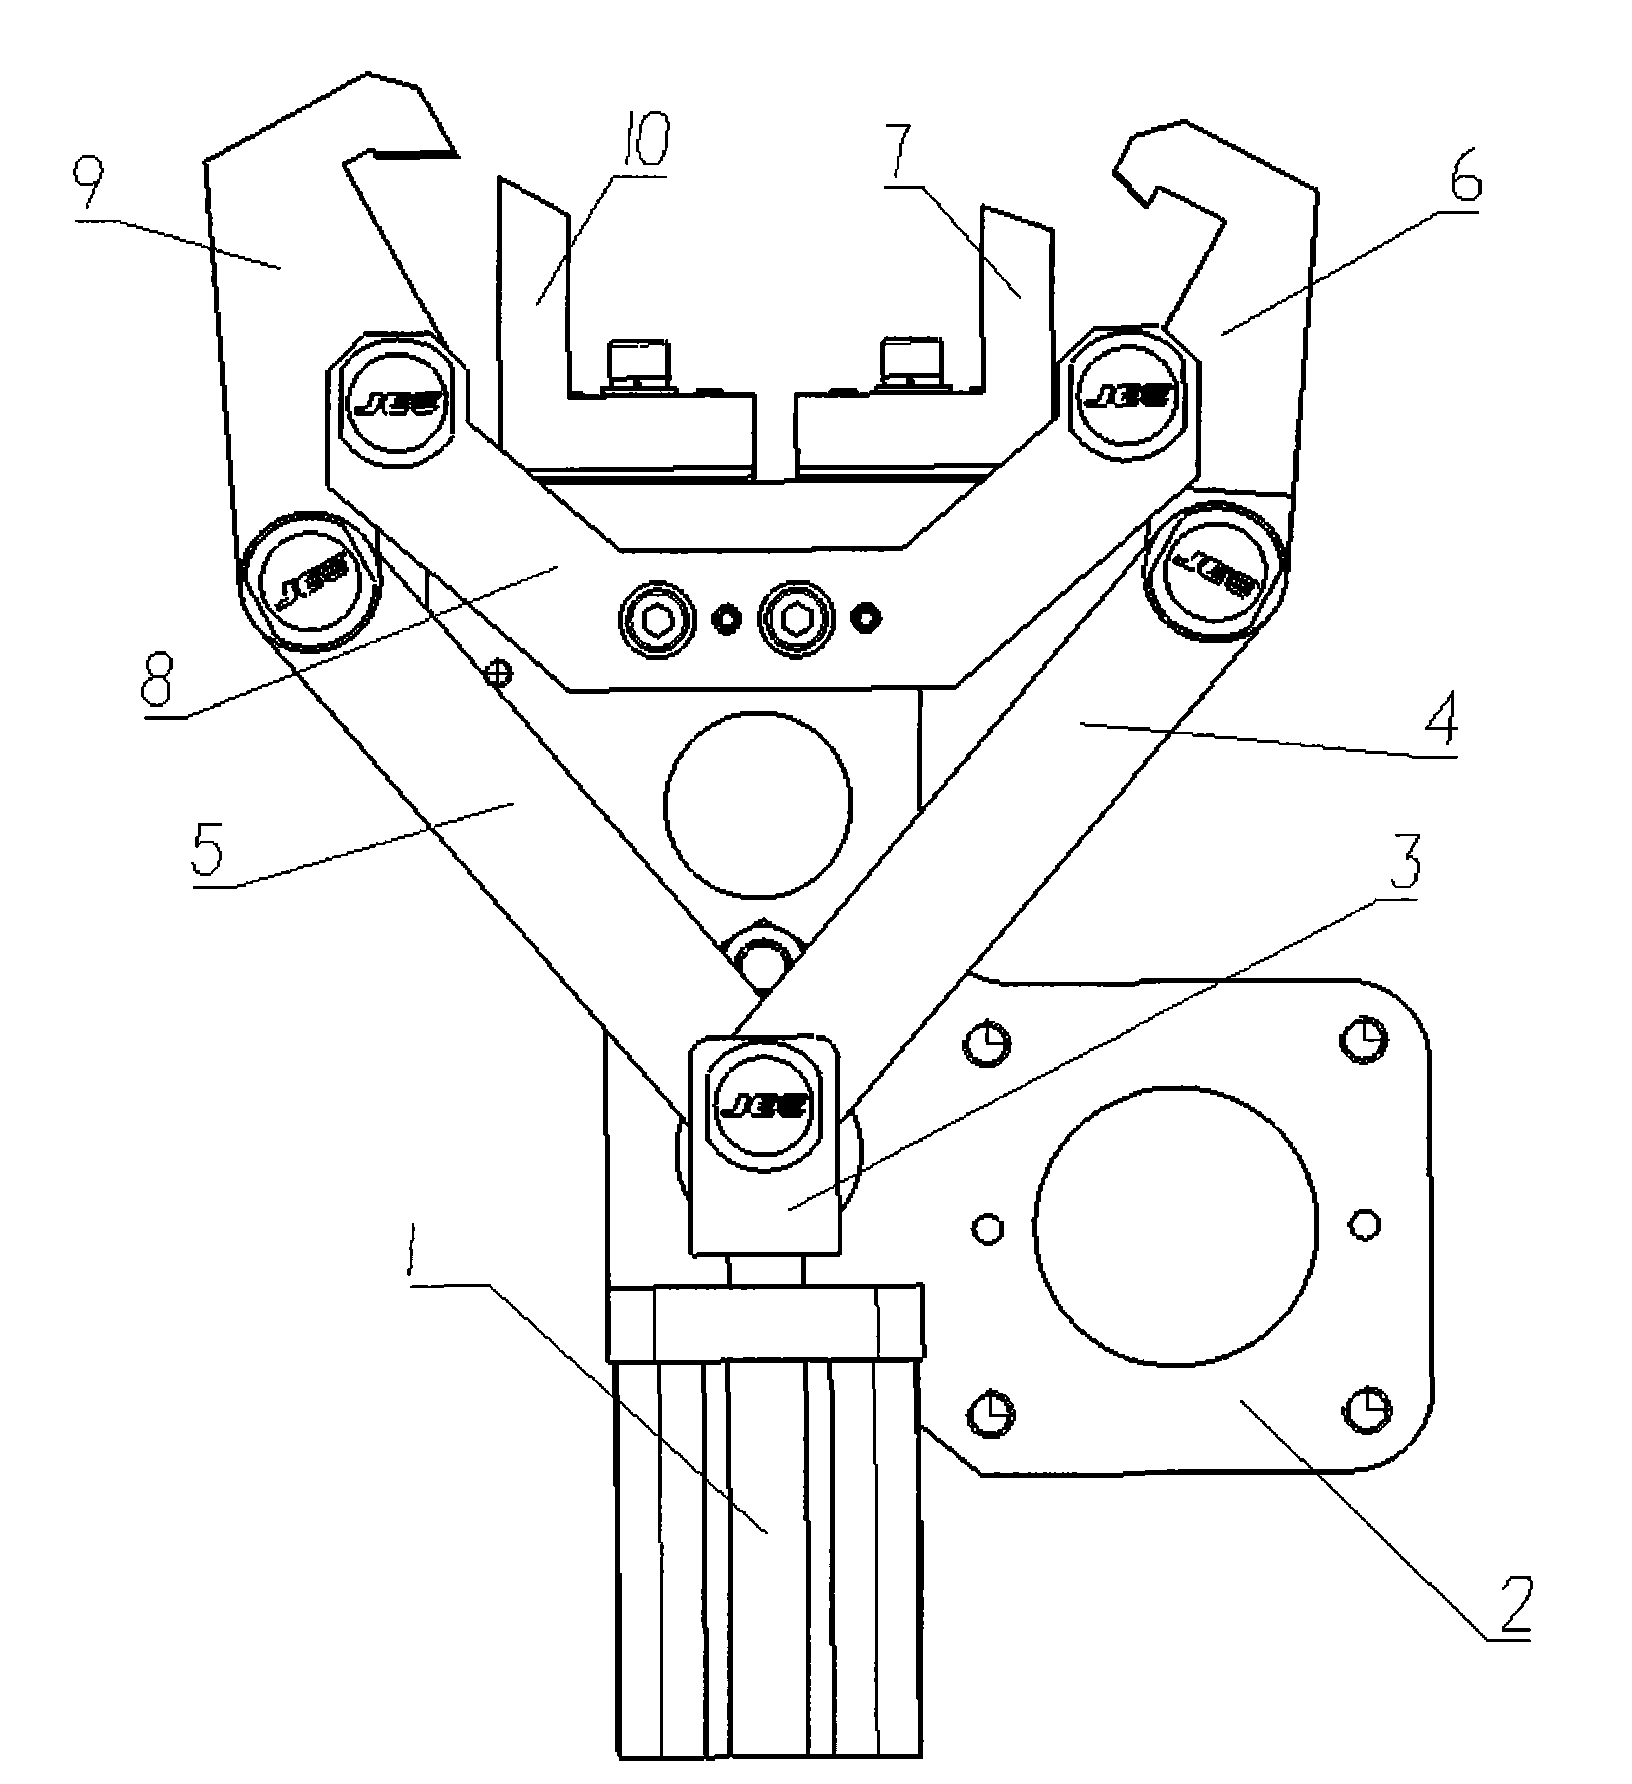 Synchronous clamping mechanism